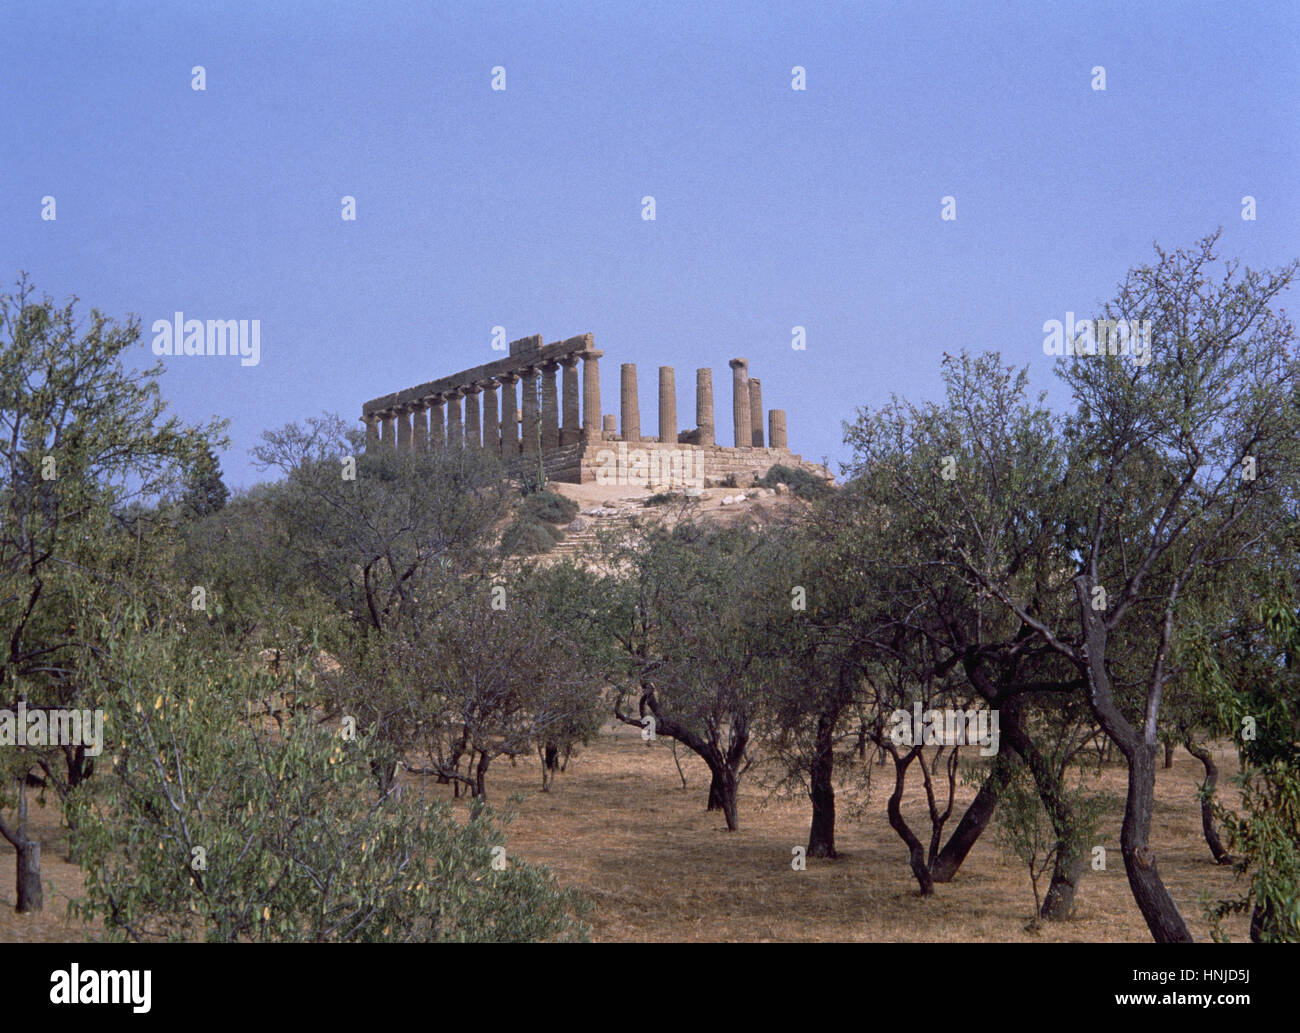 Italy. Sicily. Agrigento. Valley of the Temples. Temple of Juno Lacinia. 450 BC. Doric style. Overview. UNESCO World Heritage Site. Stock Photo